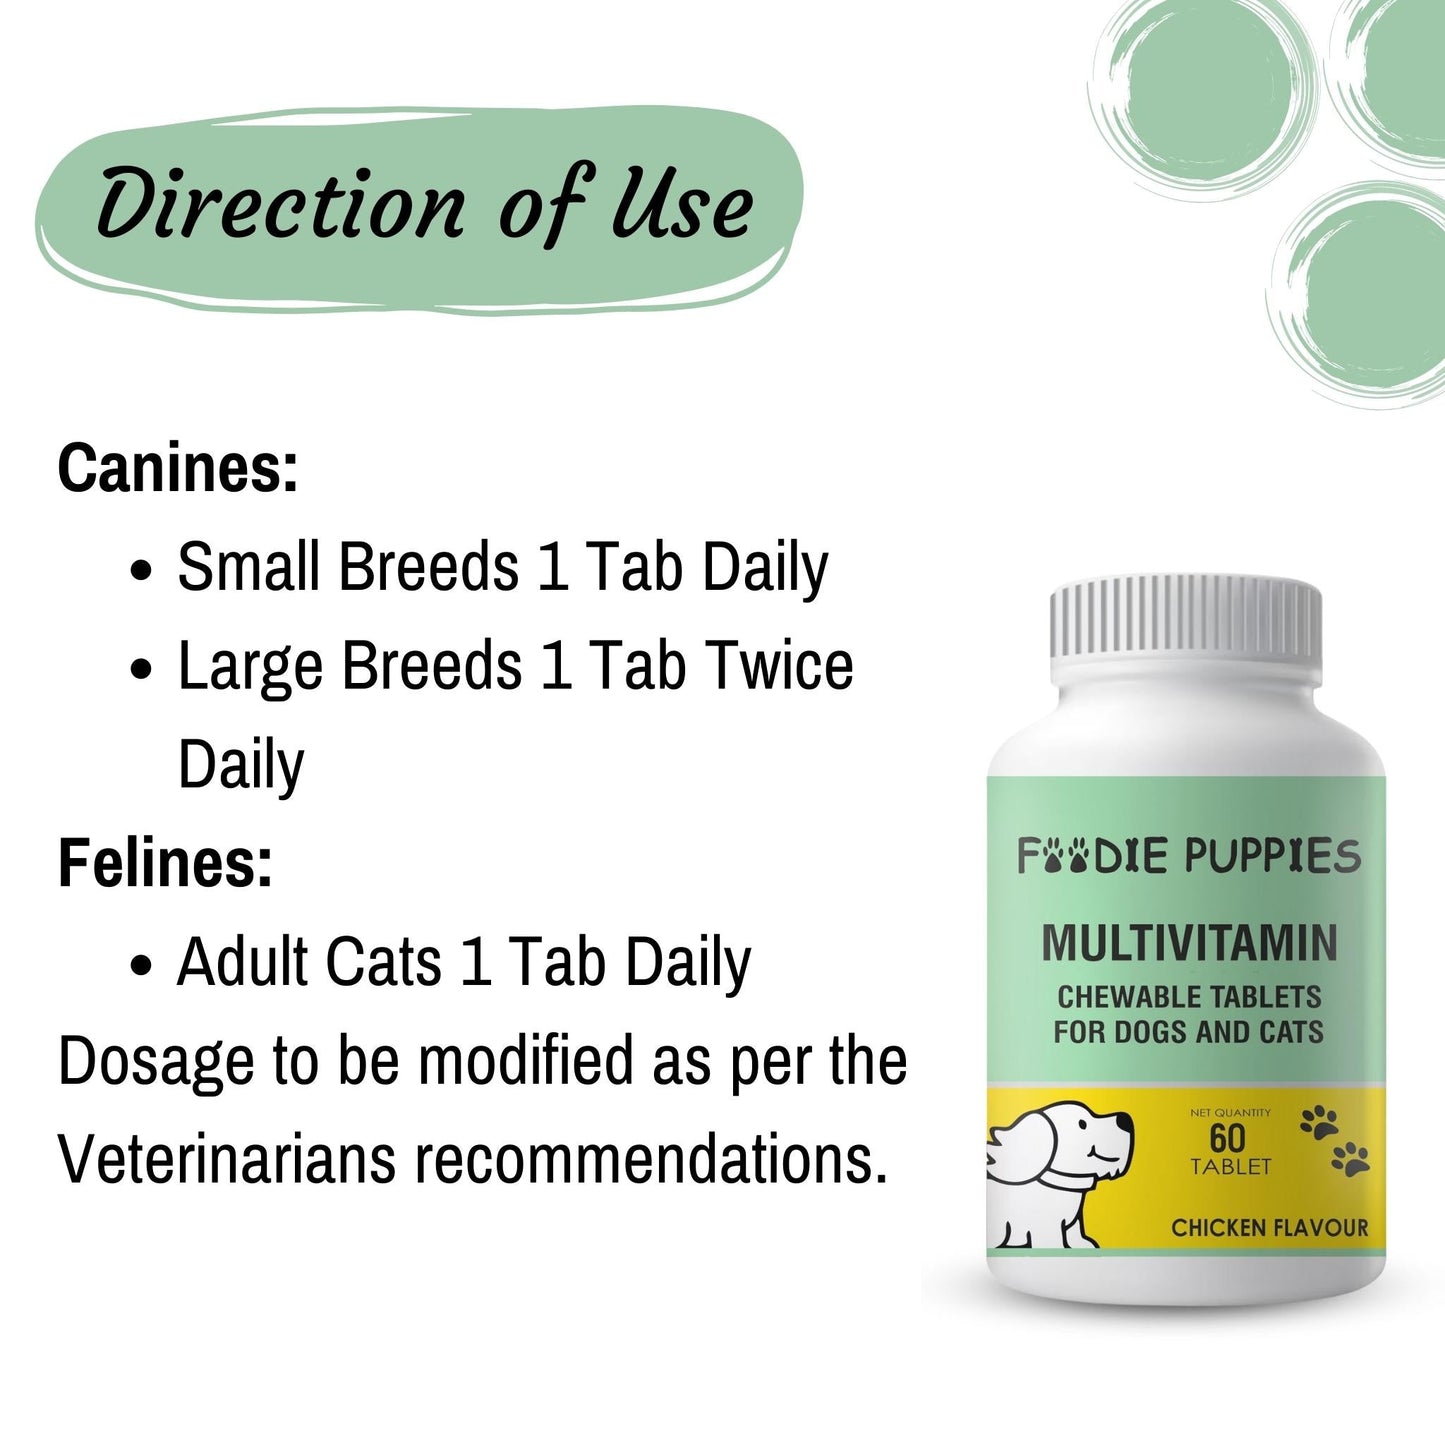 Foodie Puppies Multivitamin 60 Tablets for Dogs & Cats